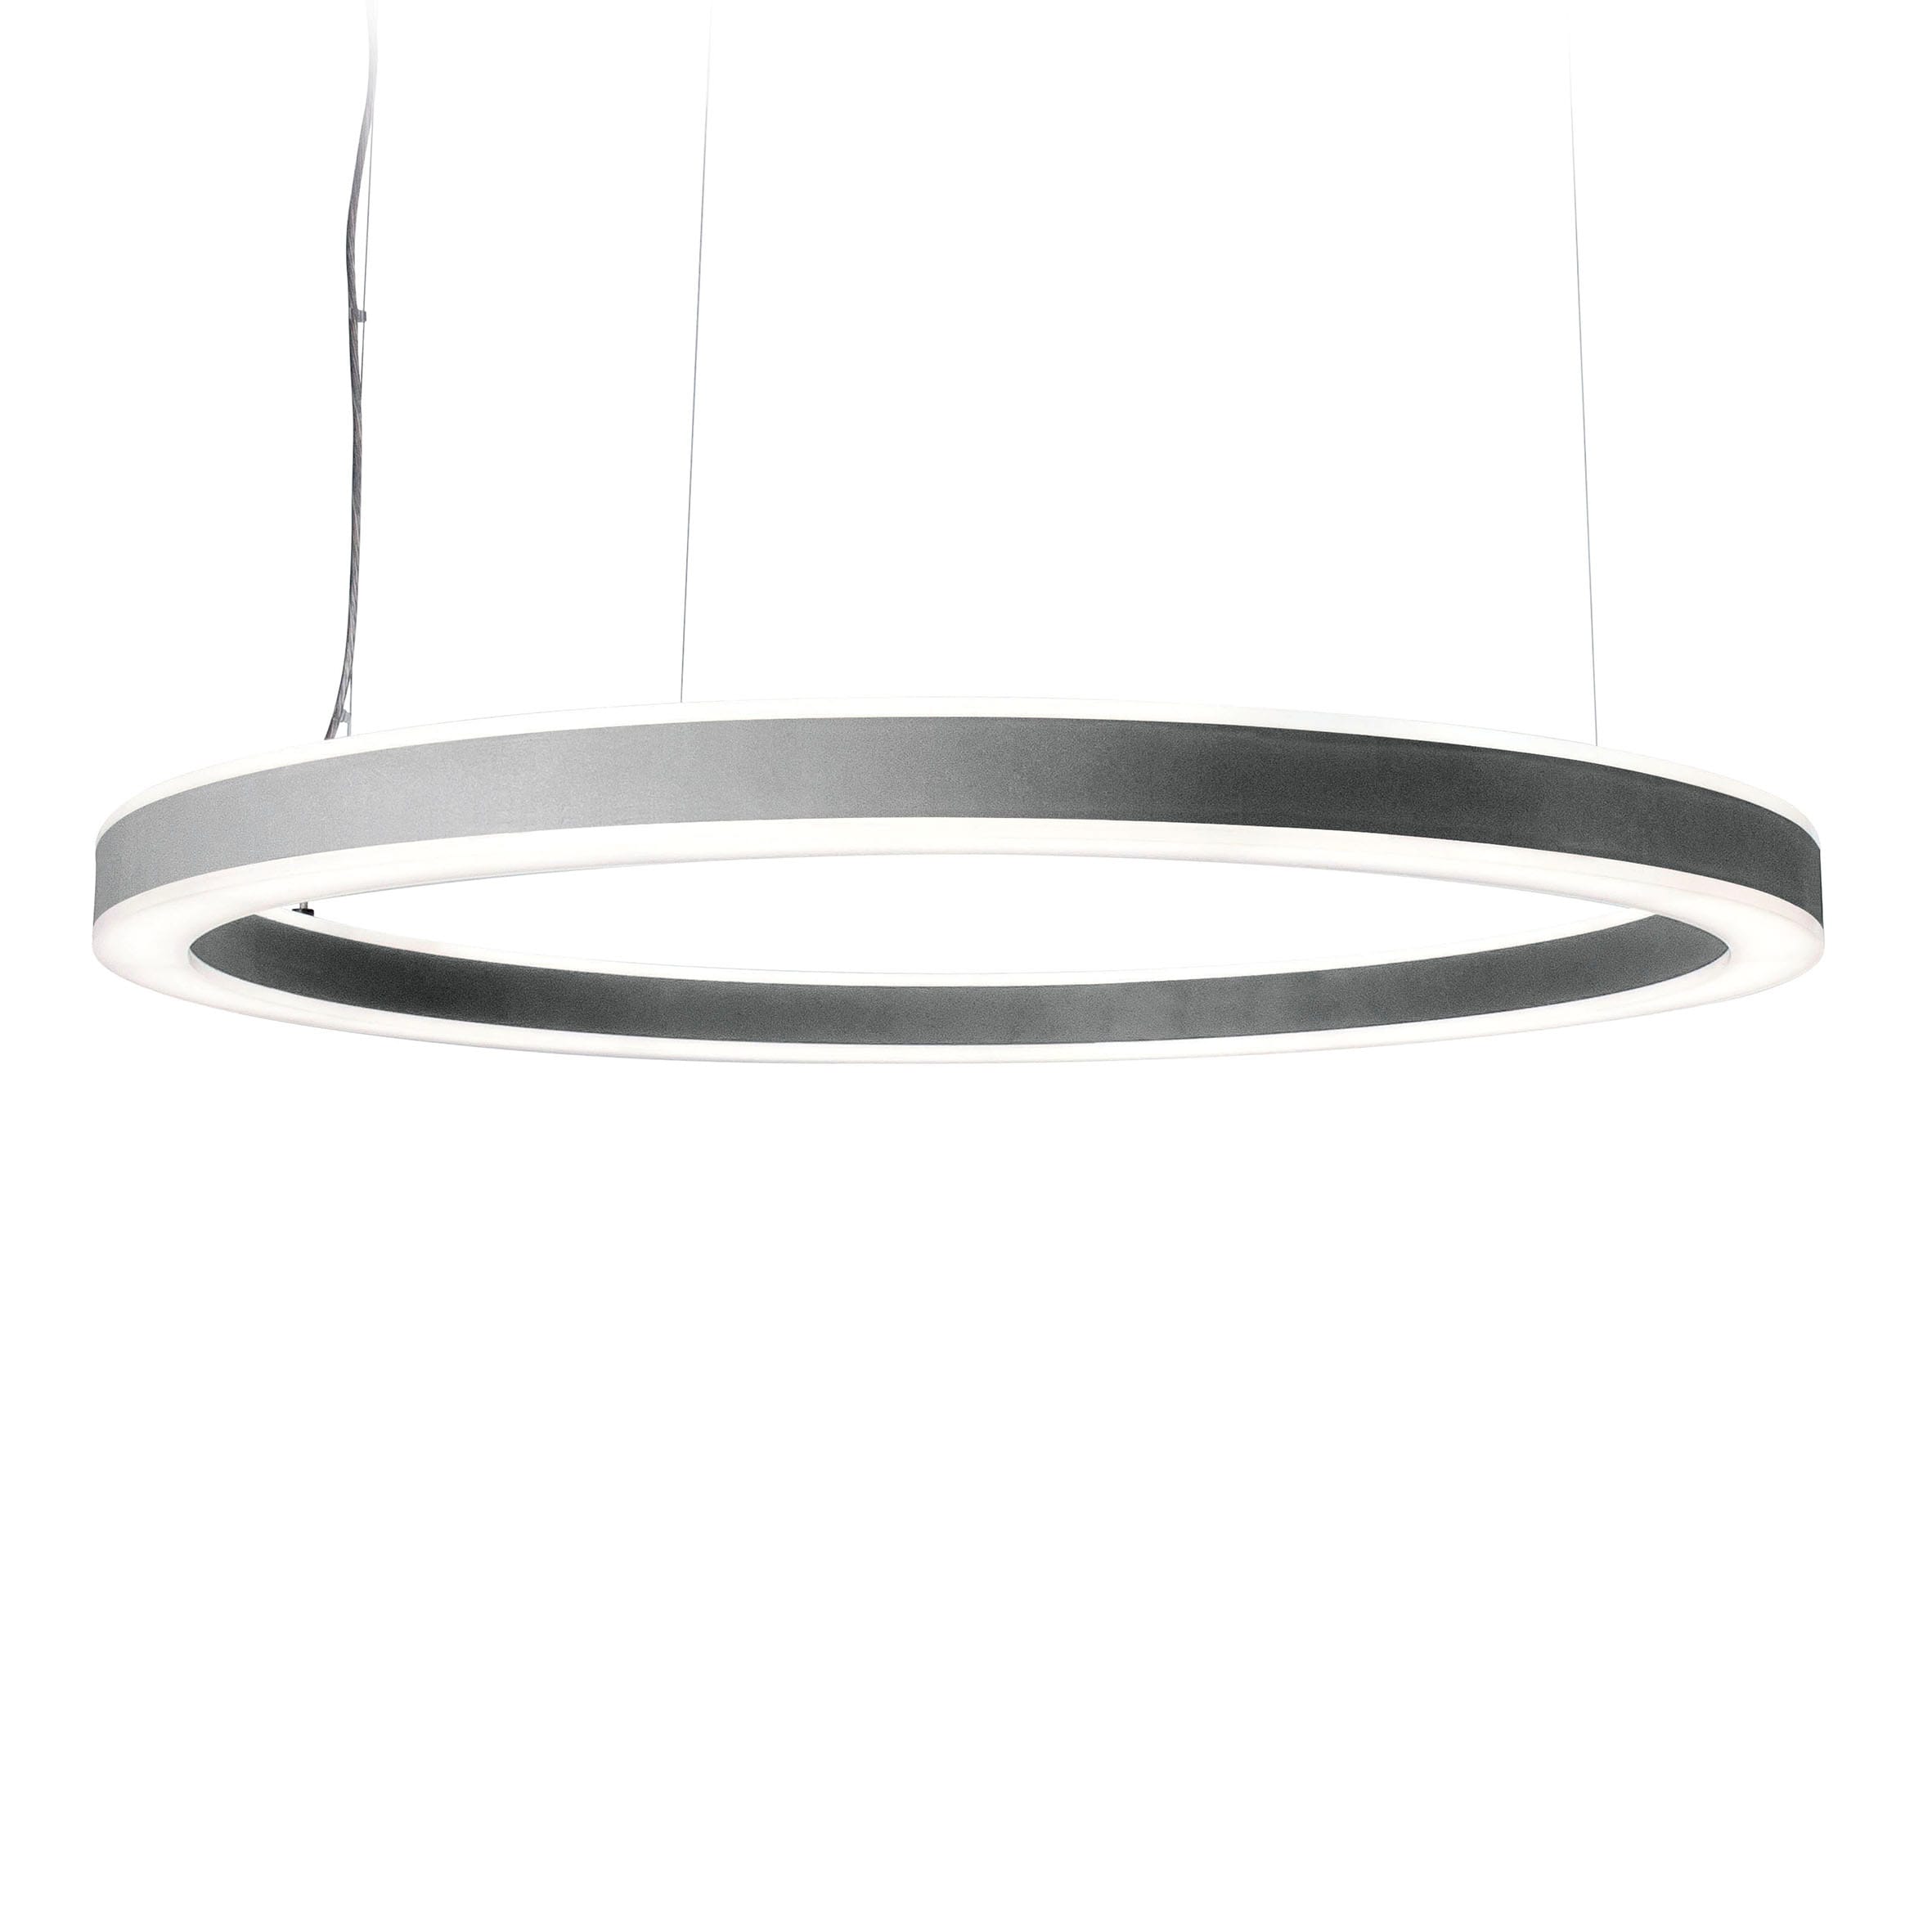 Planlicht - halo supension di-id argent 760mm LED LO 4000K 48W 3752lm